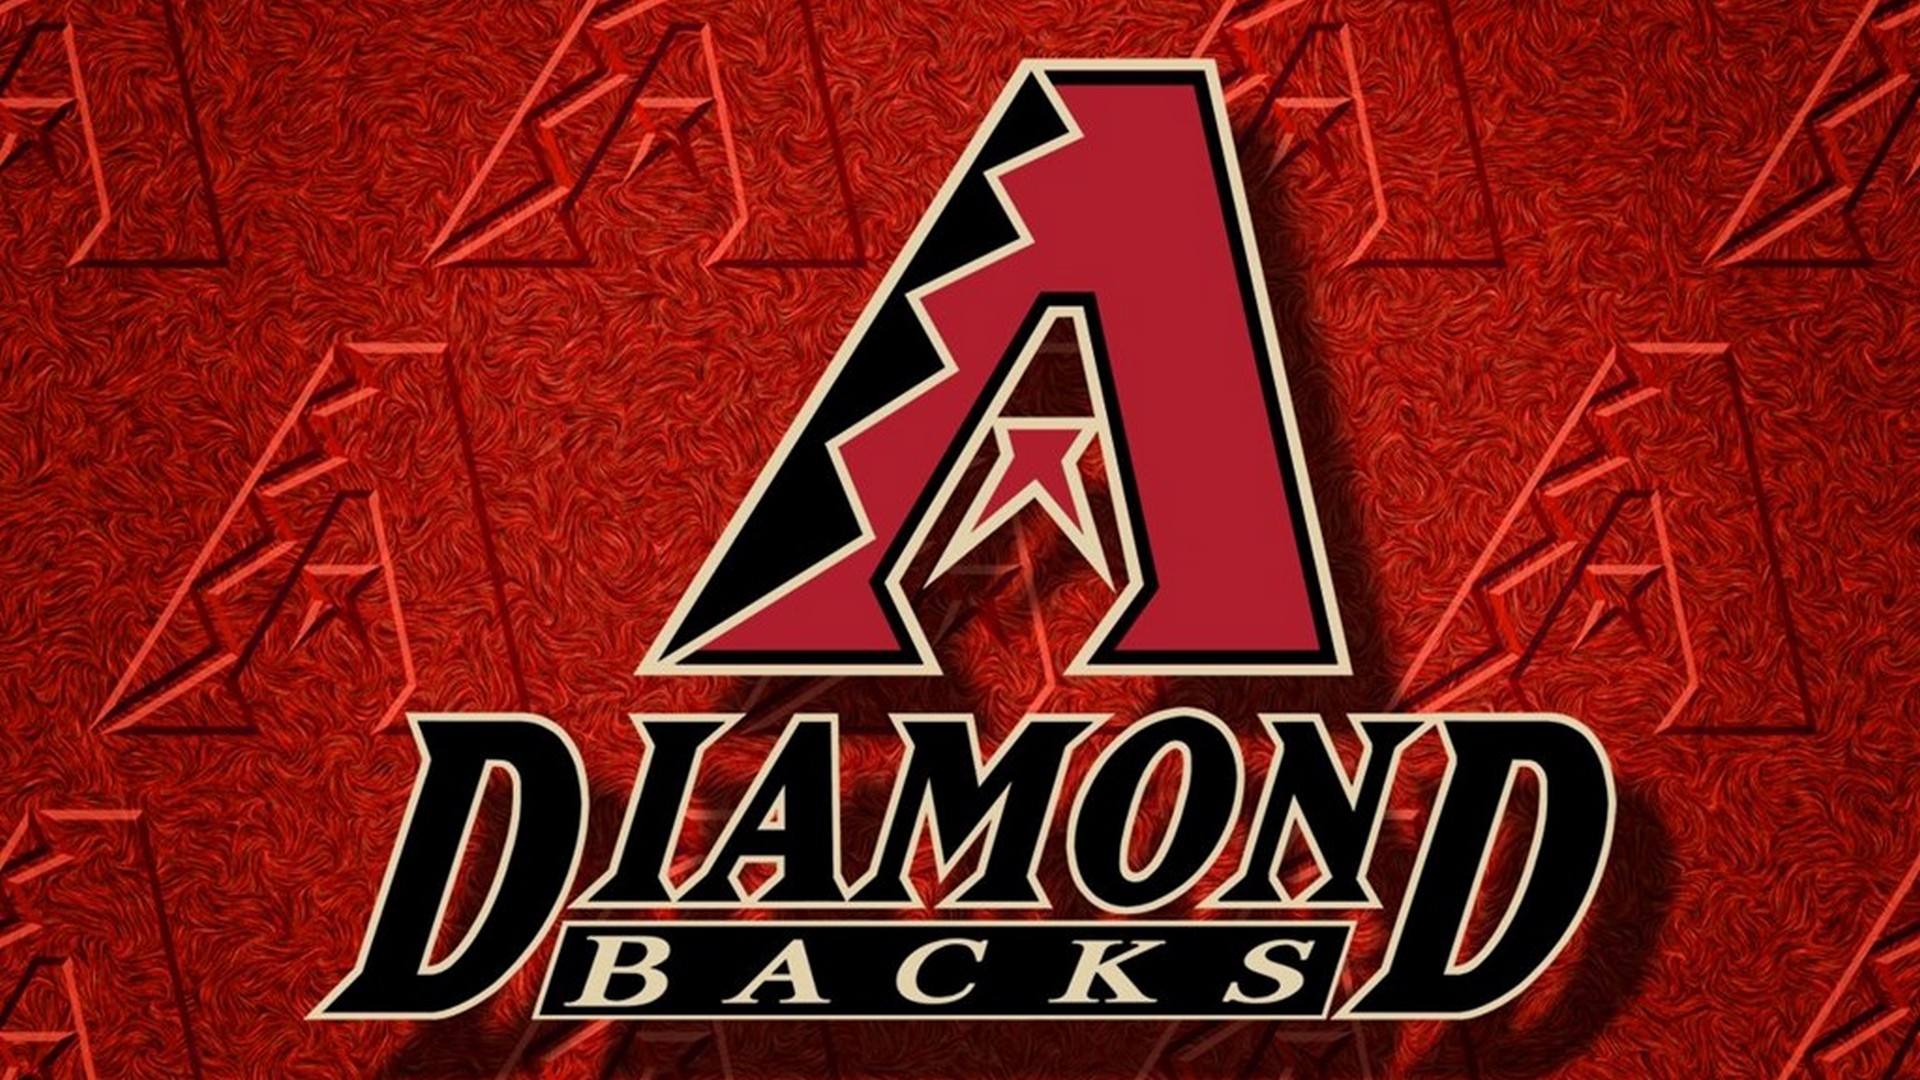 HD Backgrounds Arizona Diamondbacks MLB With high-resolution 1920X1080 pixel. You can use this wallpaper for Mac Desktop Wallpaper, Laptop Screensavers, Android Wallpapers, Tablet or iPhone Home Screen and another mobile phone device